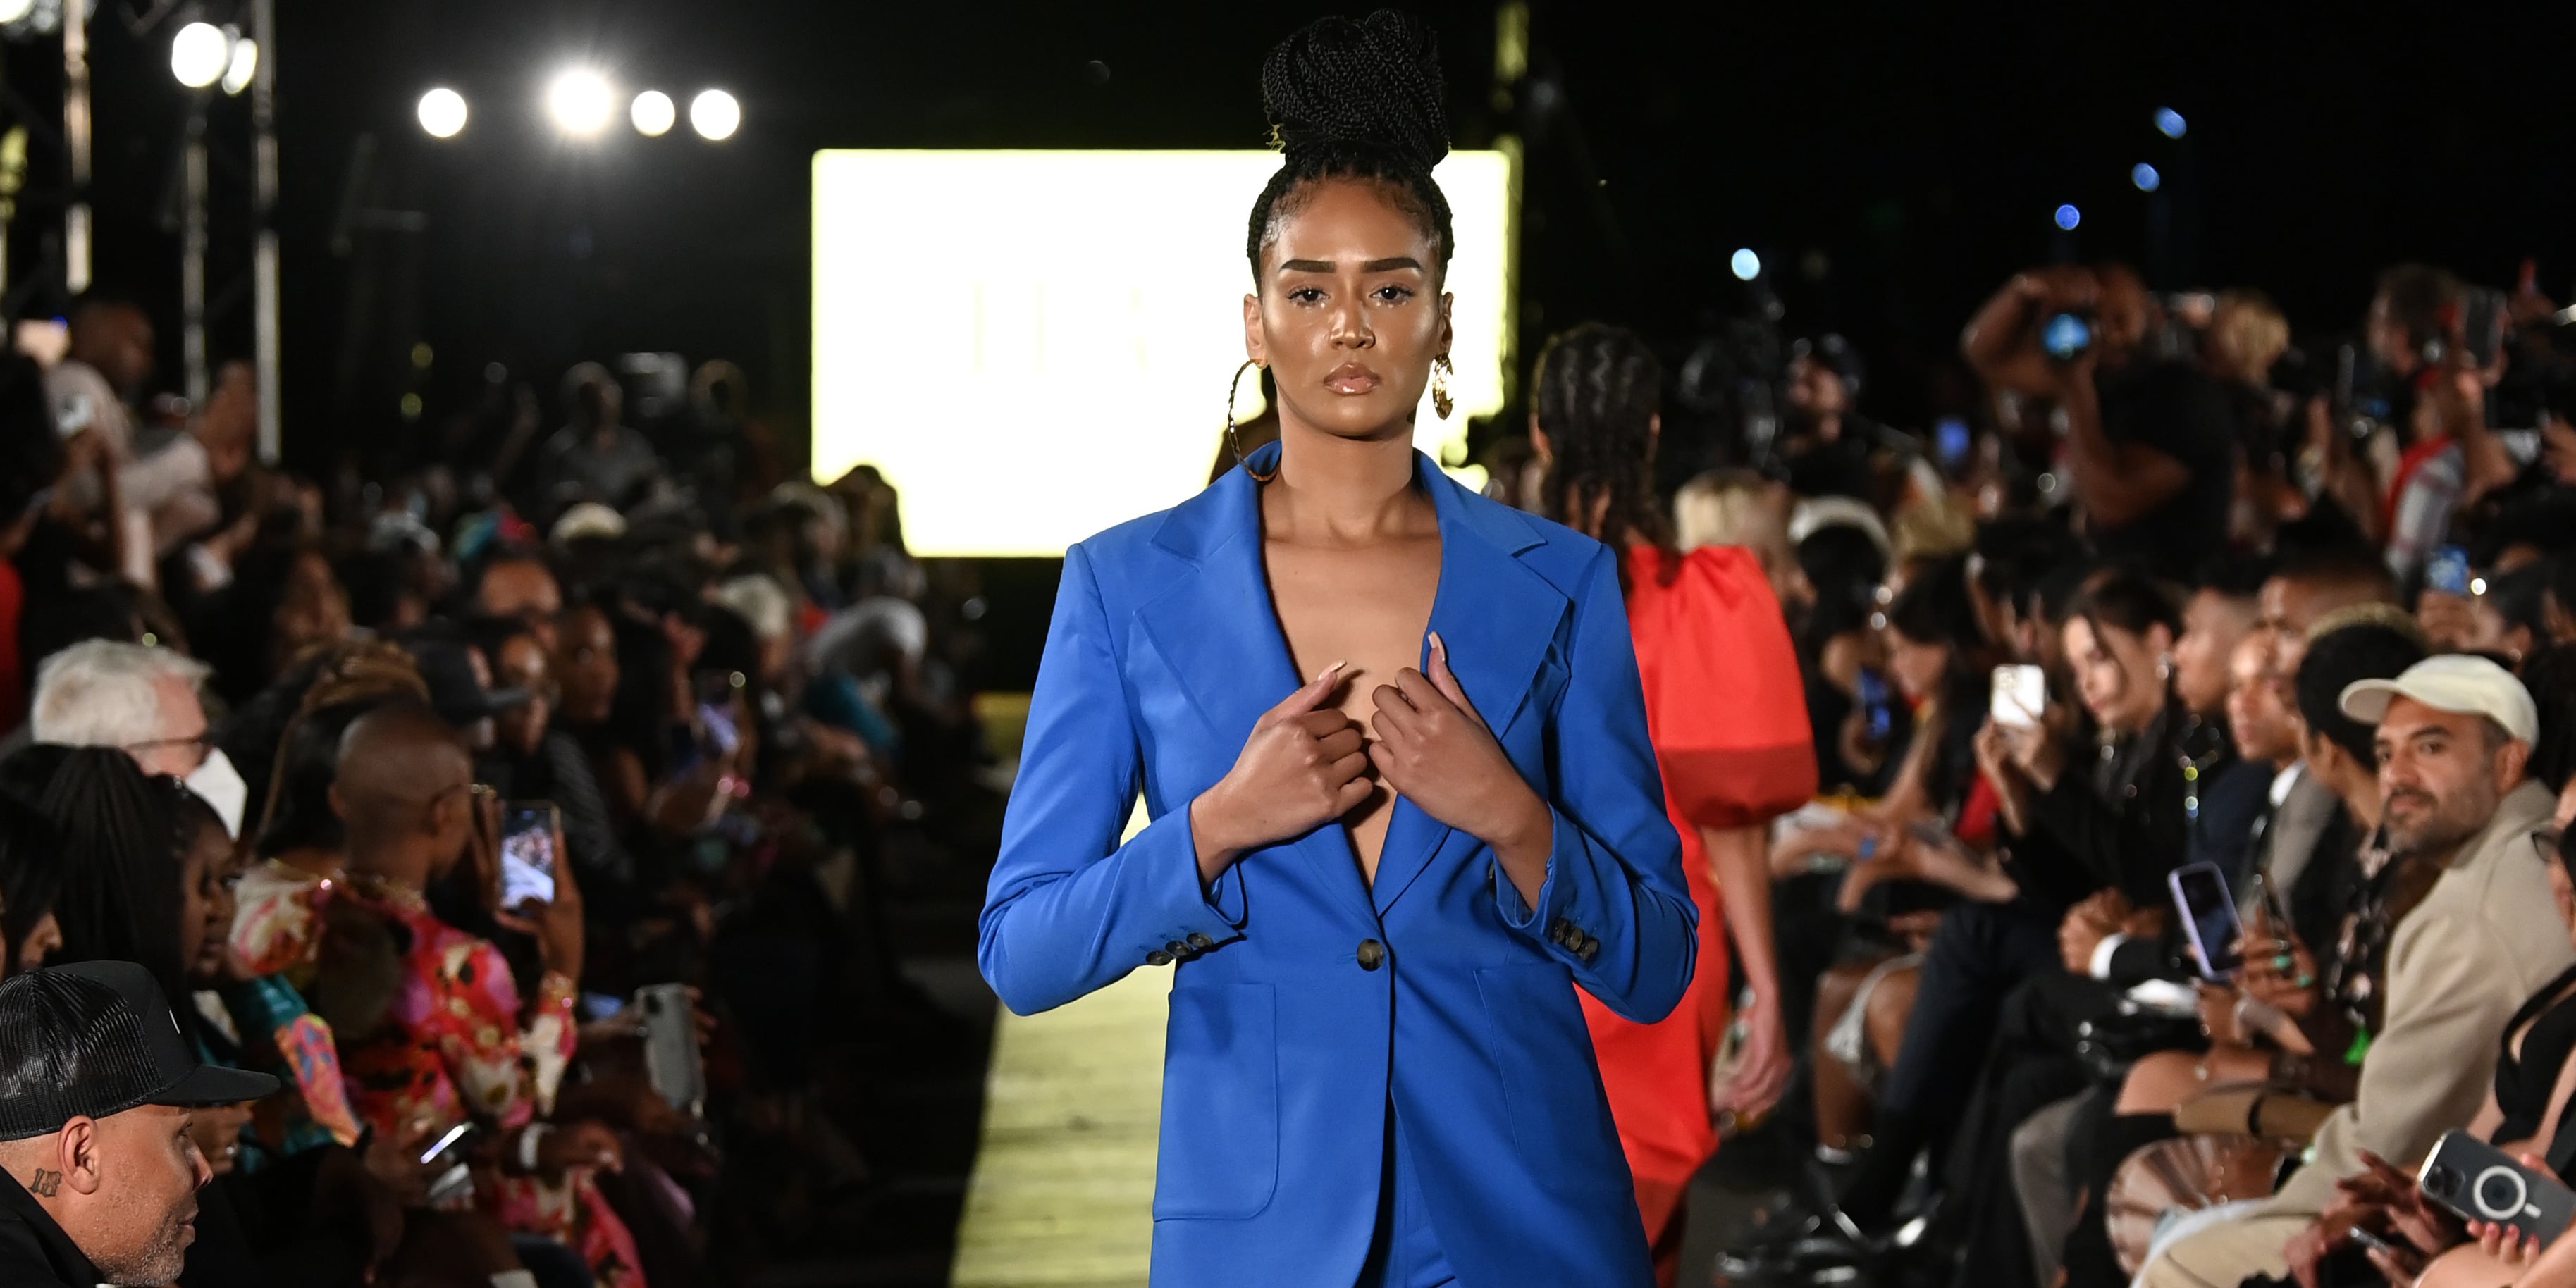 Three Harlem's Fashion Row Designers Created the Looks Worn by the